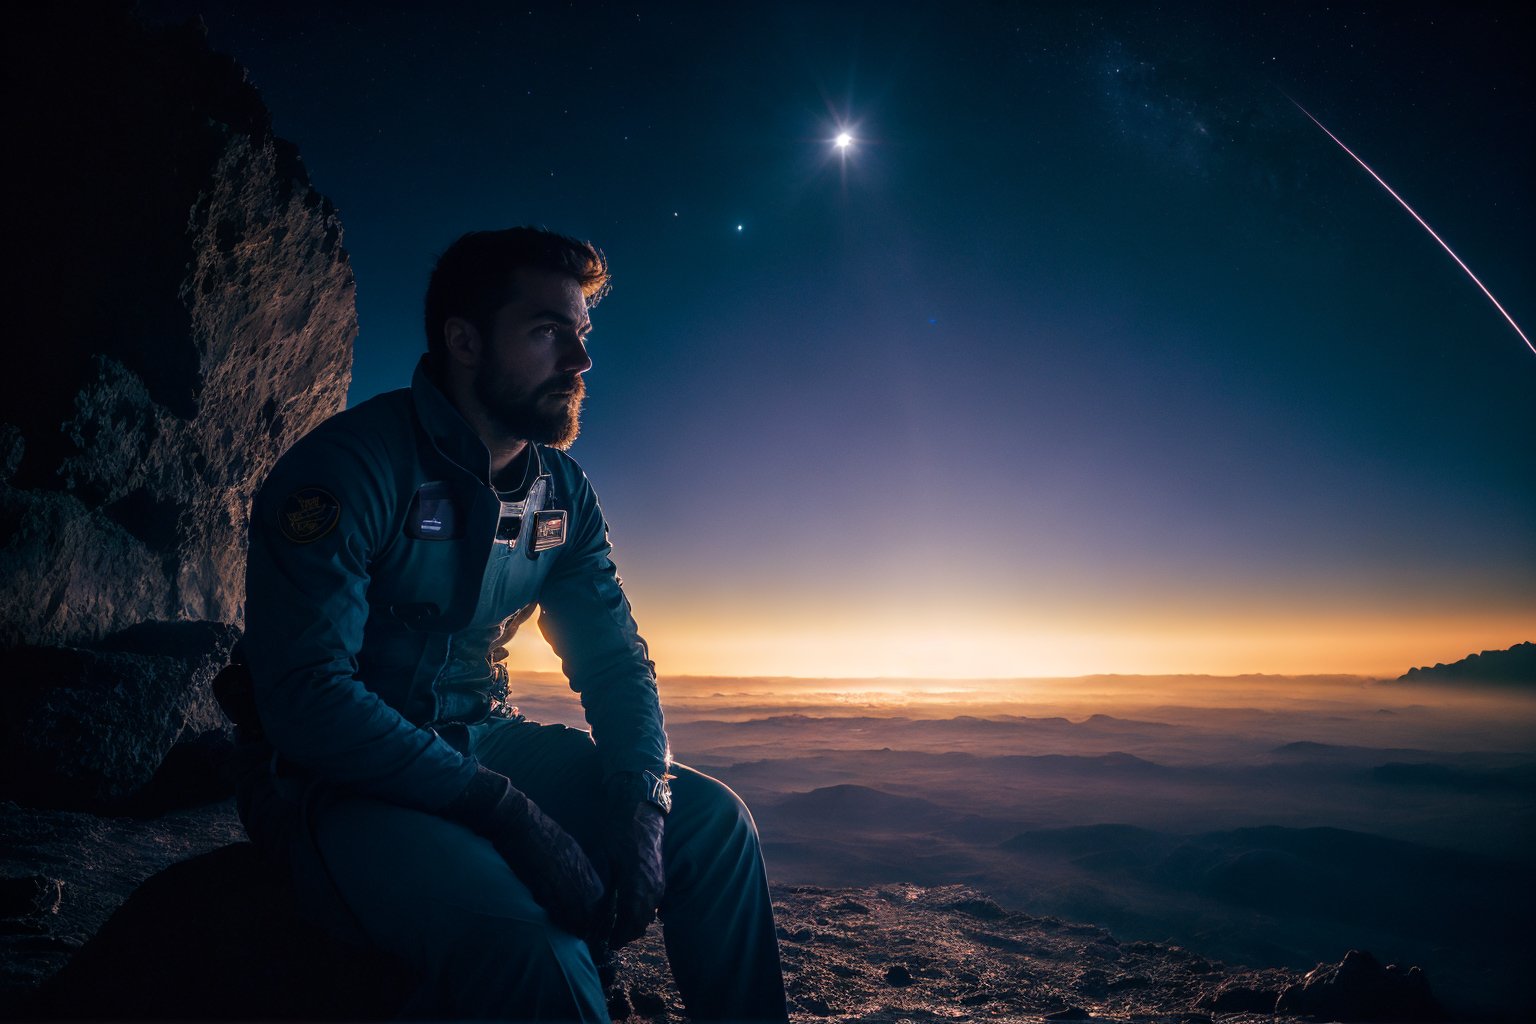 medium full body,  (70 degree side angle),  a 30 y.o explorer,  facial hair,  sitting on a research platform floating in the middle of an asteroid belt. He looks confident and determined,  looking at the vast and mysterious universe with wonder and respect,  surrounded by several asteroids glowing with fiery auras. Dramatic lighting from distant stars and planets illuminates the scene,  casting deep shadows on the suit. film photography,  film grain,  glare,  film lighting